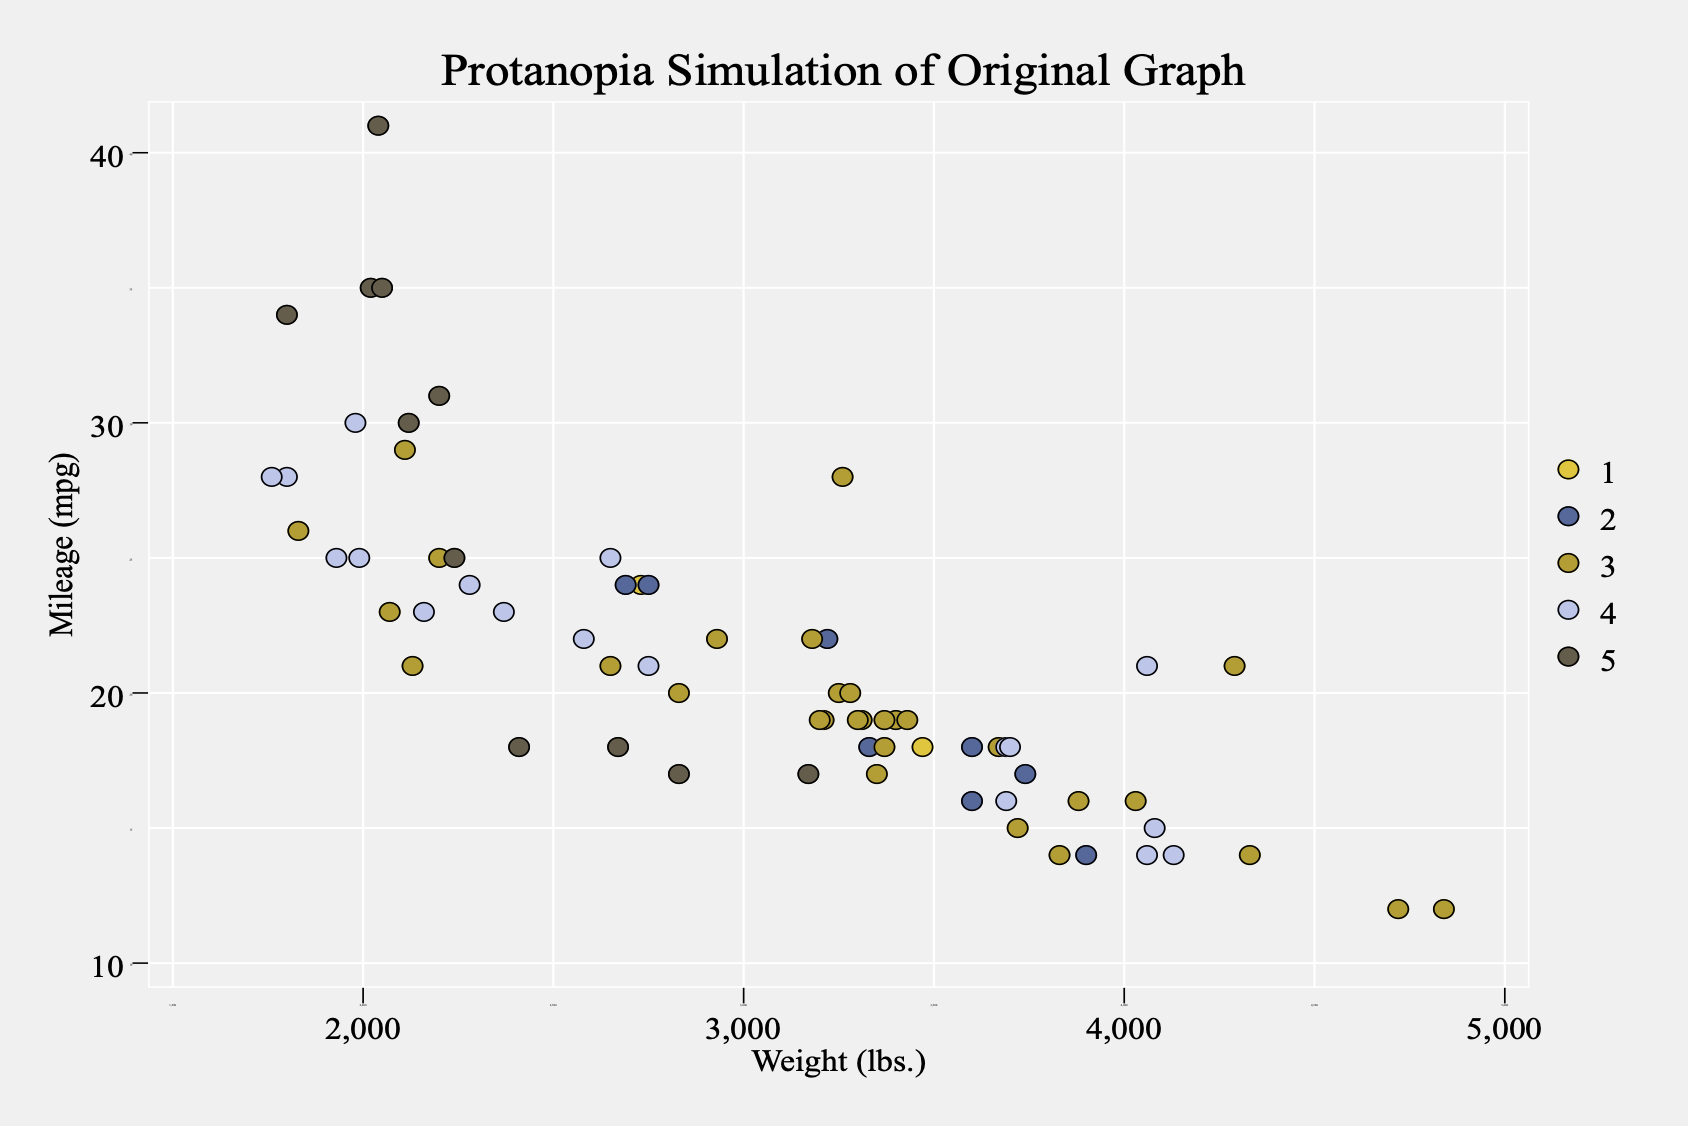 Example of same Stata graph using Kelly's contrasting colors with colors simulated to show protanopia.